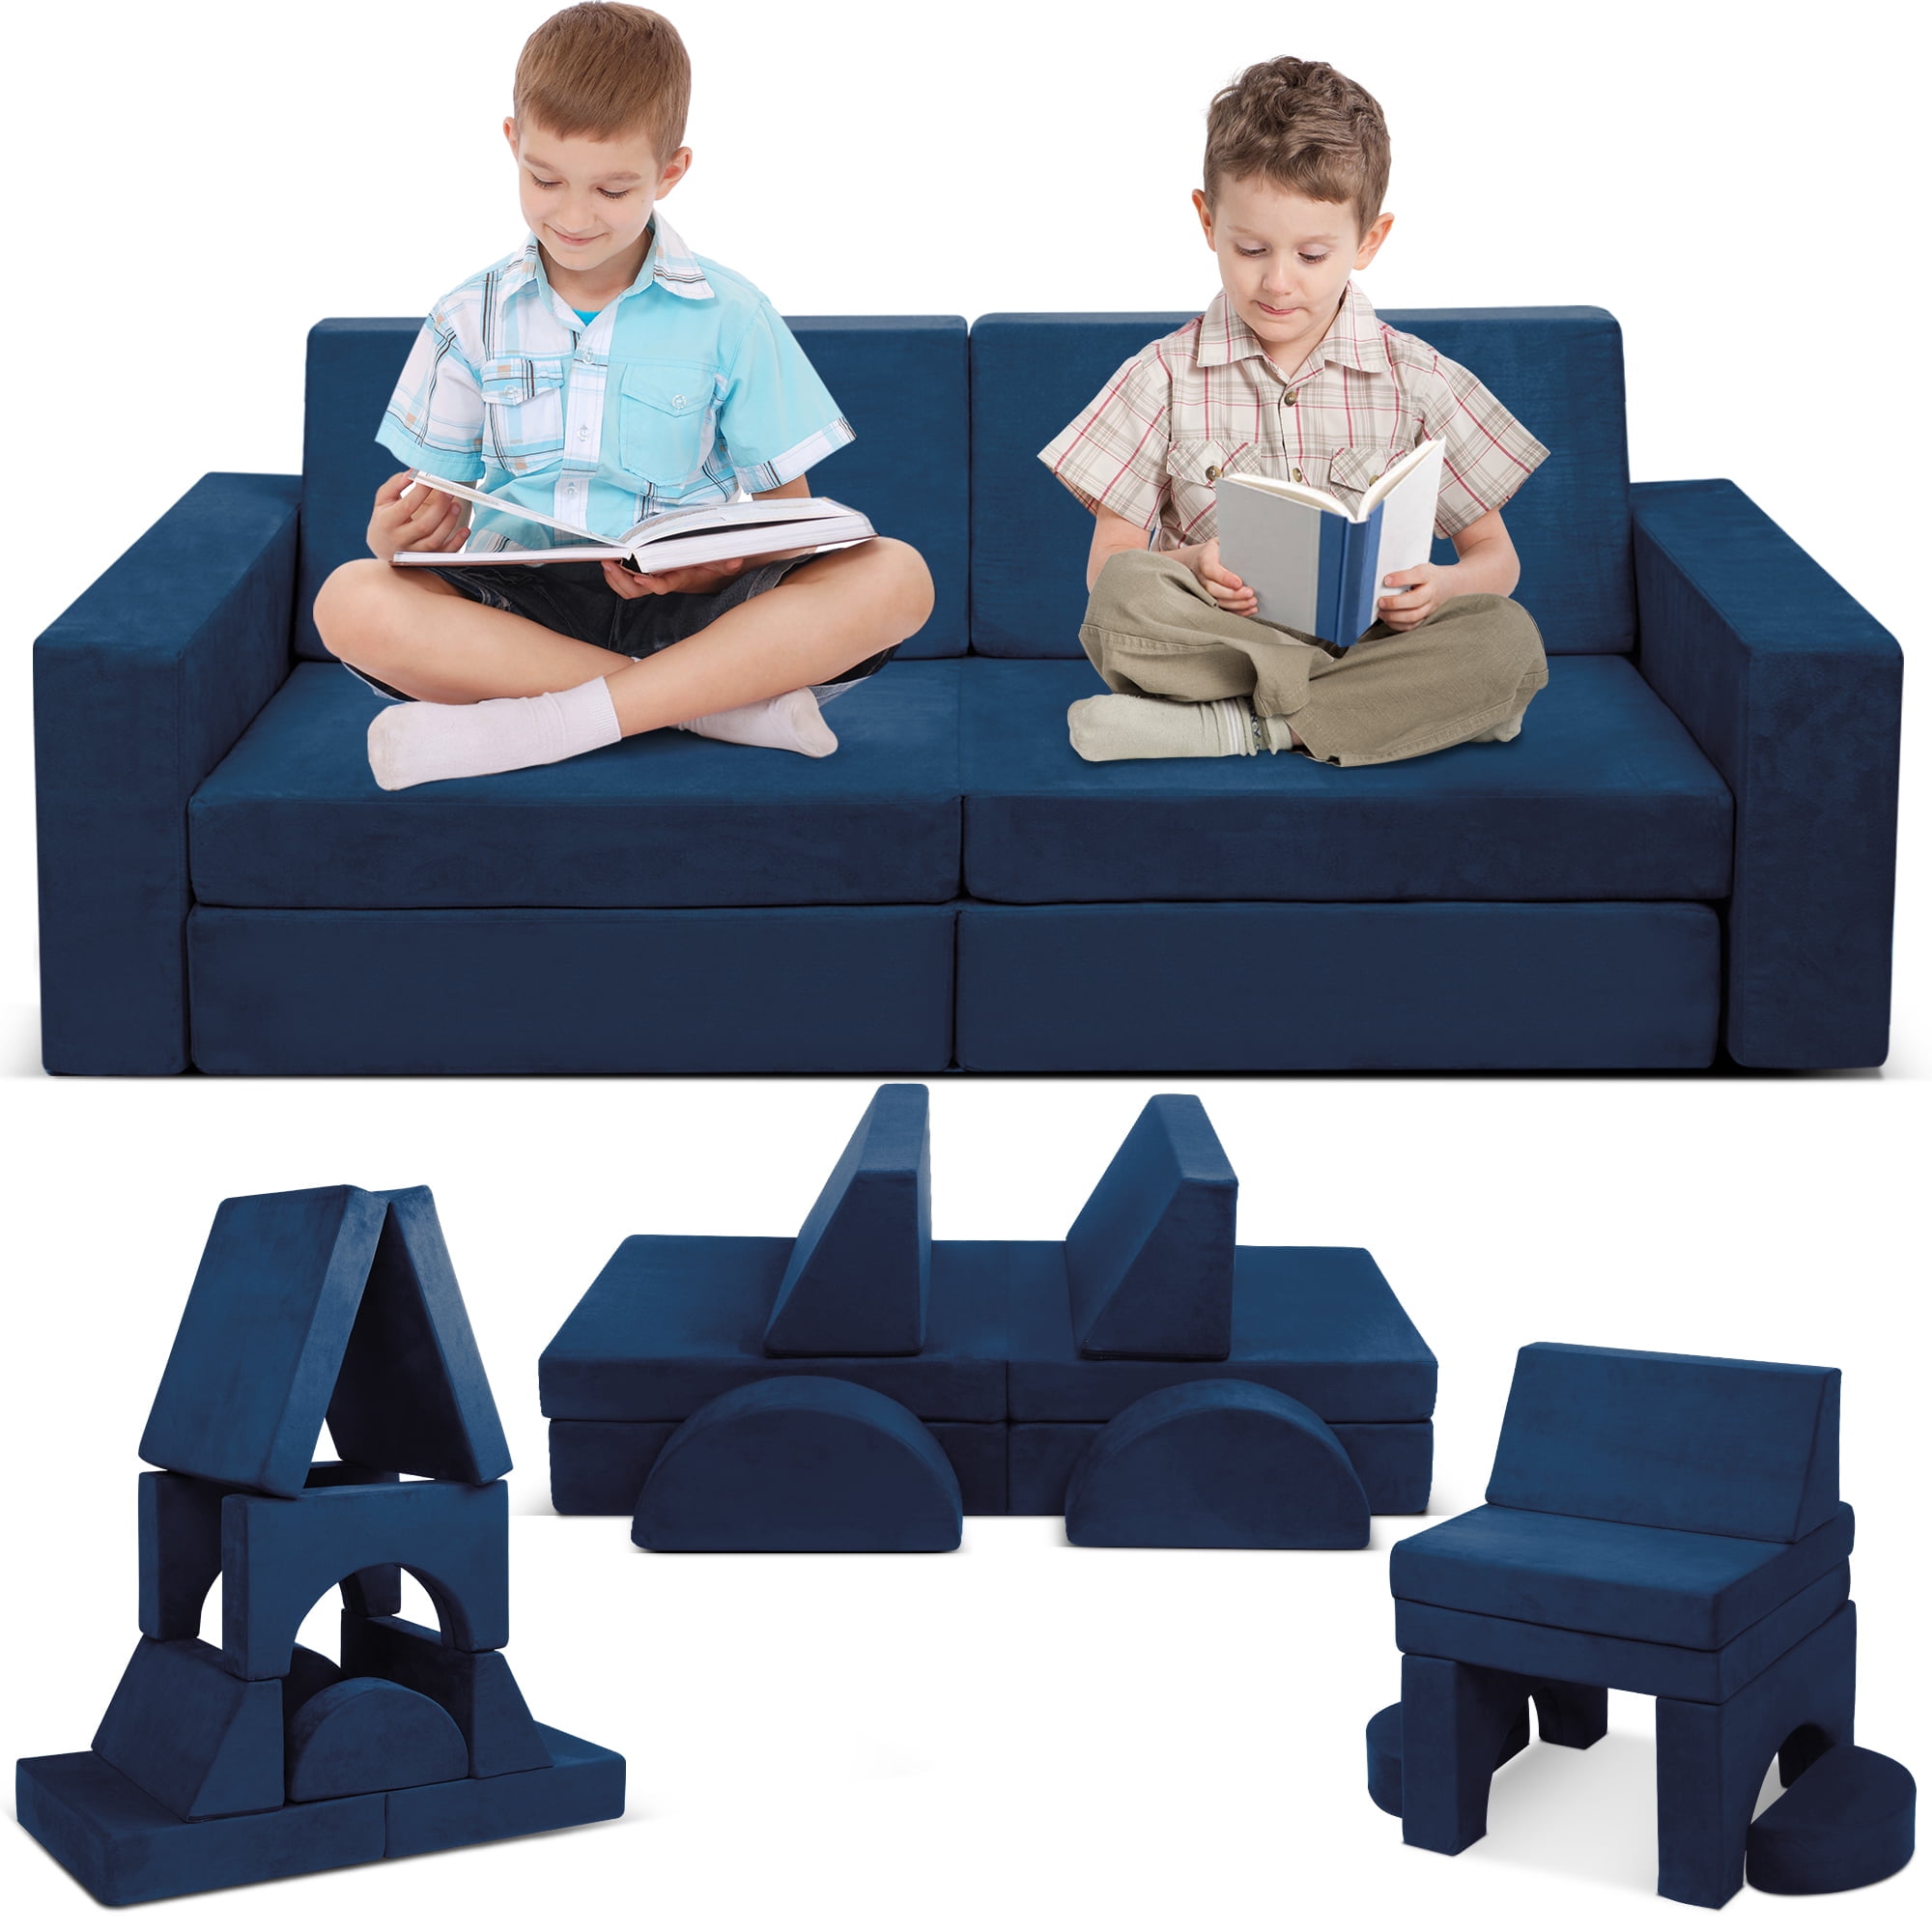 Tolead Modular Kids Play Couch Child Sectional Sofa, Imaginative Furniture  Play Set for Creative Kids,Toddler to Teen Bedroom Furniture, Girls and Boys  Playroom Convertible Sofa, Gray